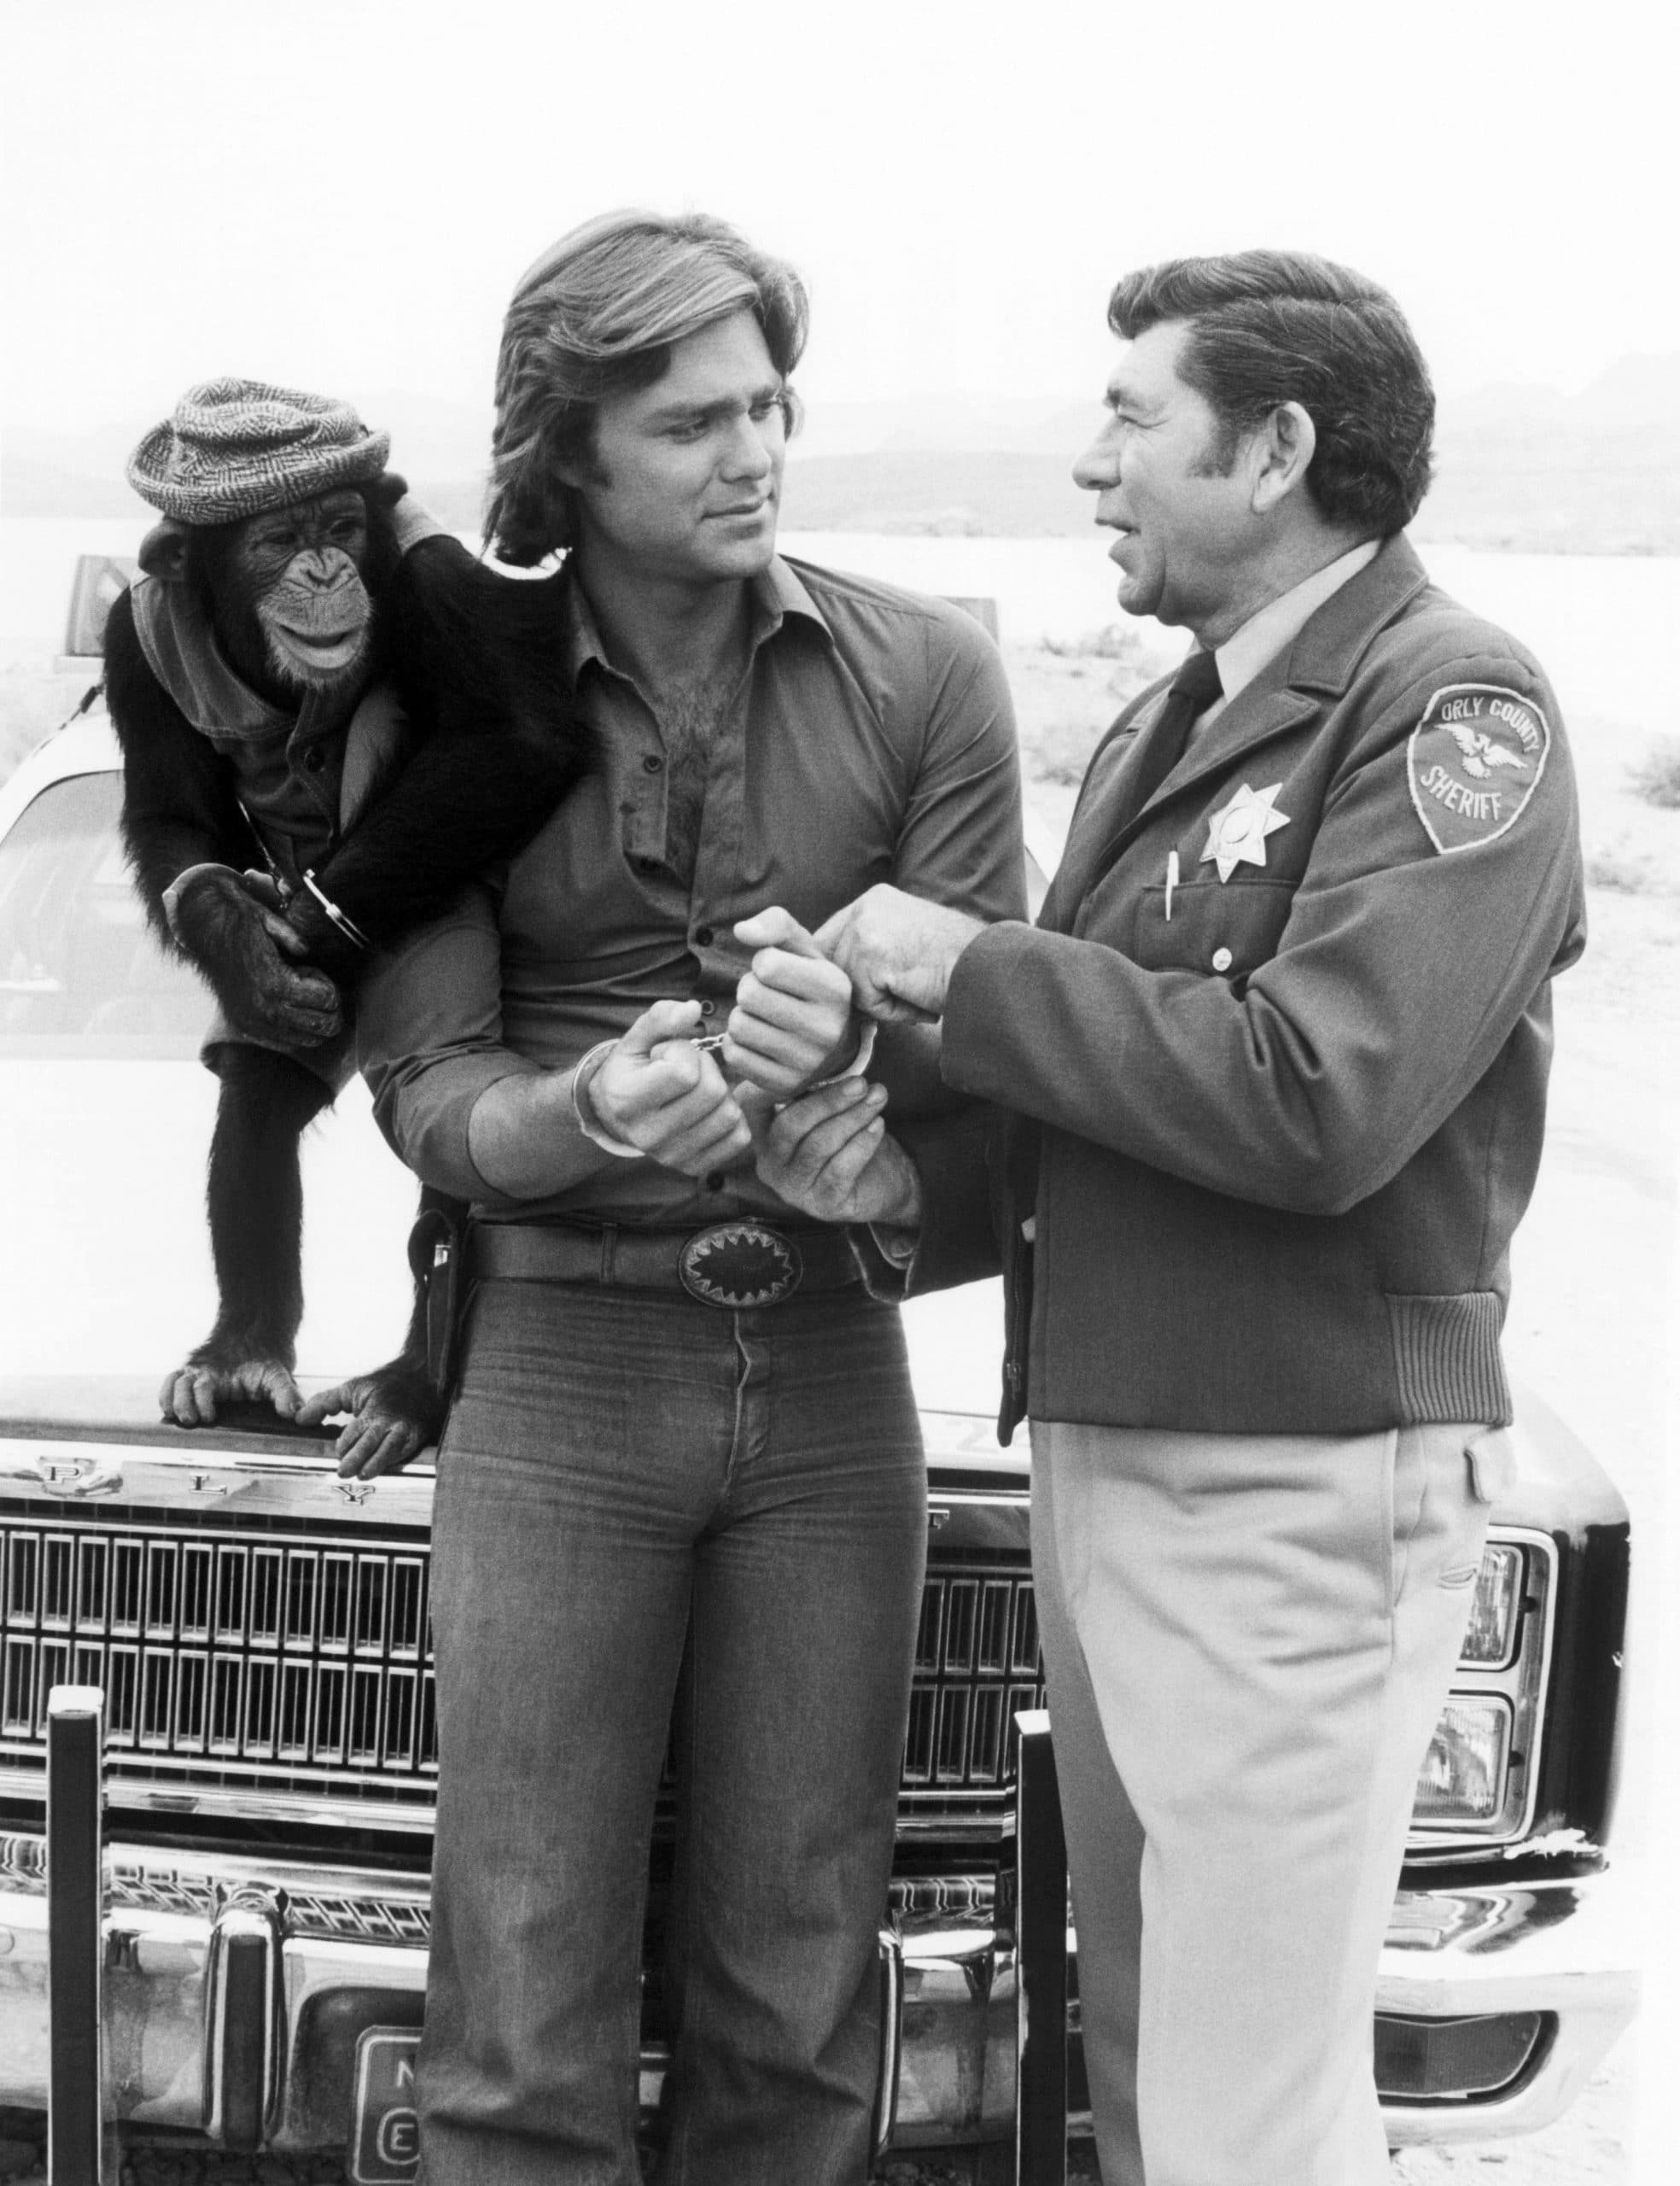 B.J. AND THE BEAR, from left: Sam the Chimp, Greg Evigan, Claude Akins in 'Run For the Money' (Season 2, Episode 6, aired November 3, 1979), 1979-81